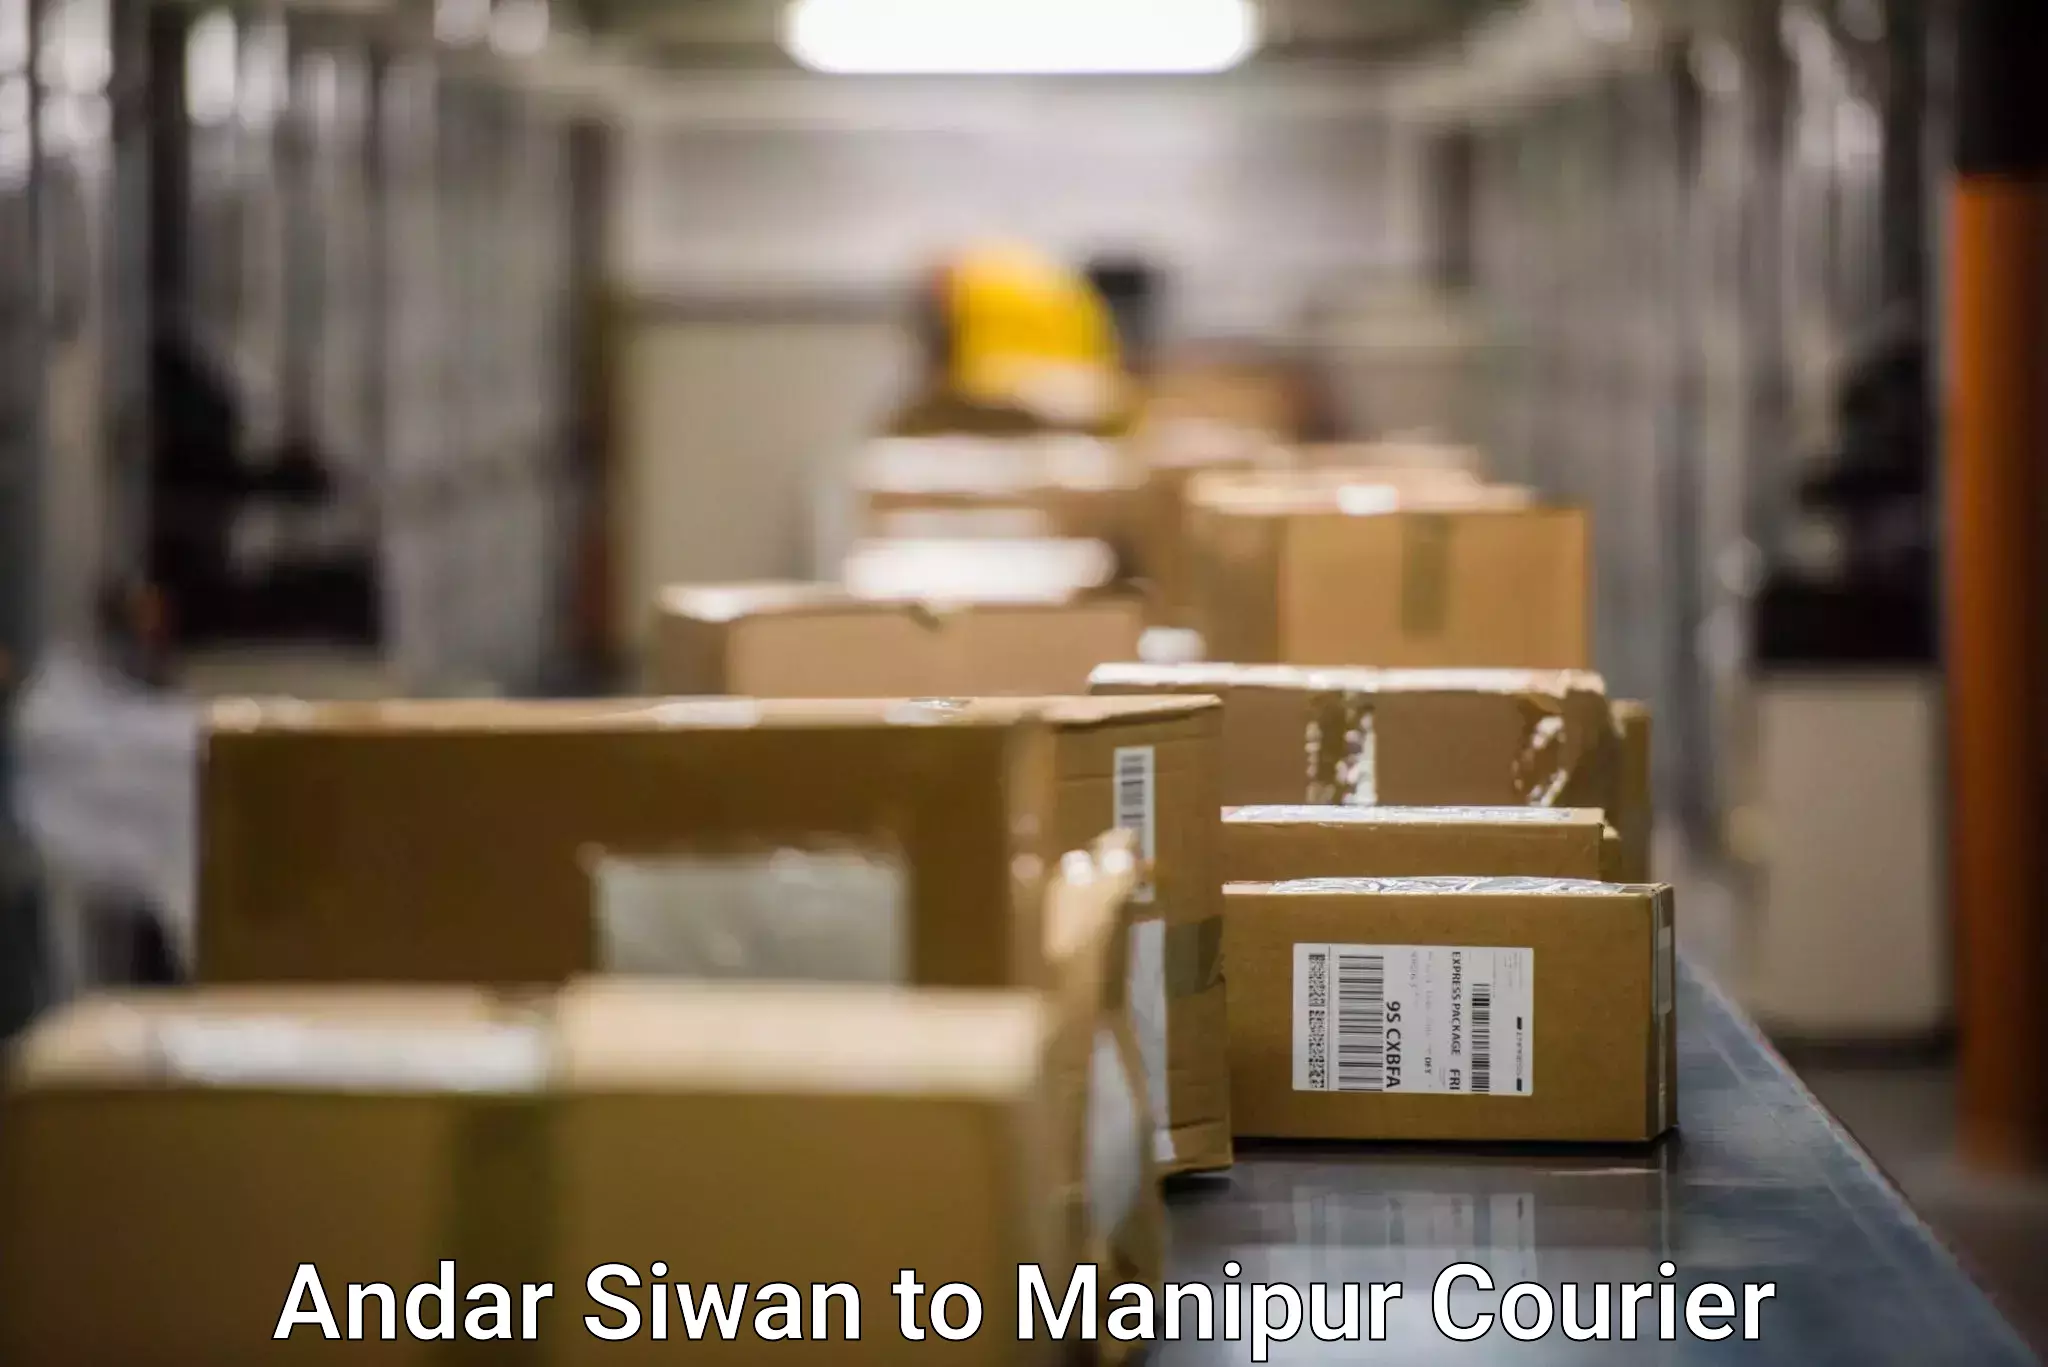 Nationwide shipping capabilities Andar Siwan to Manipur